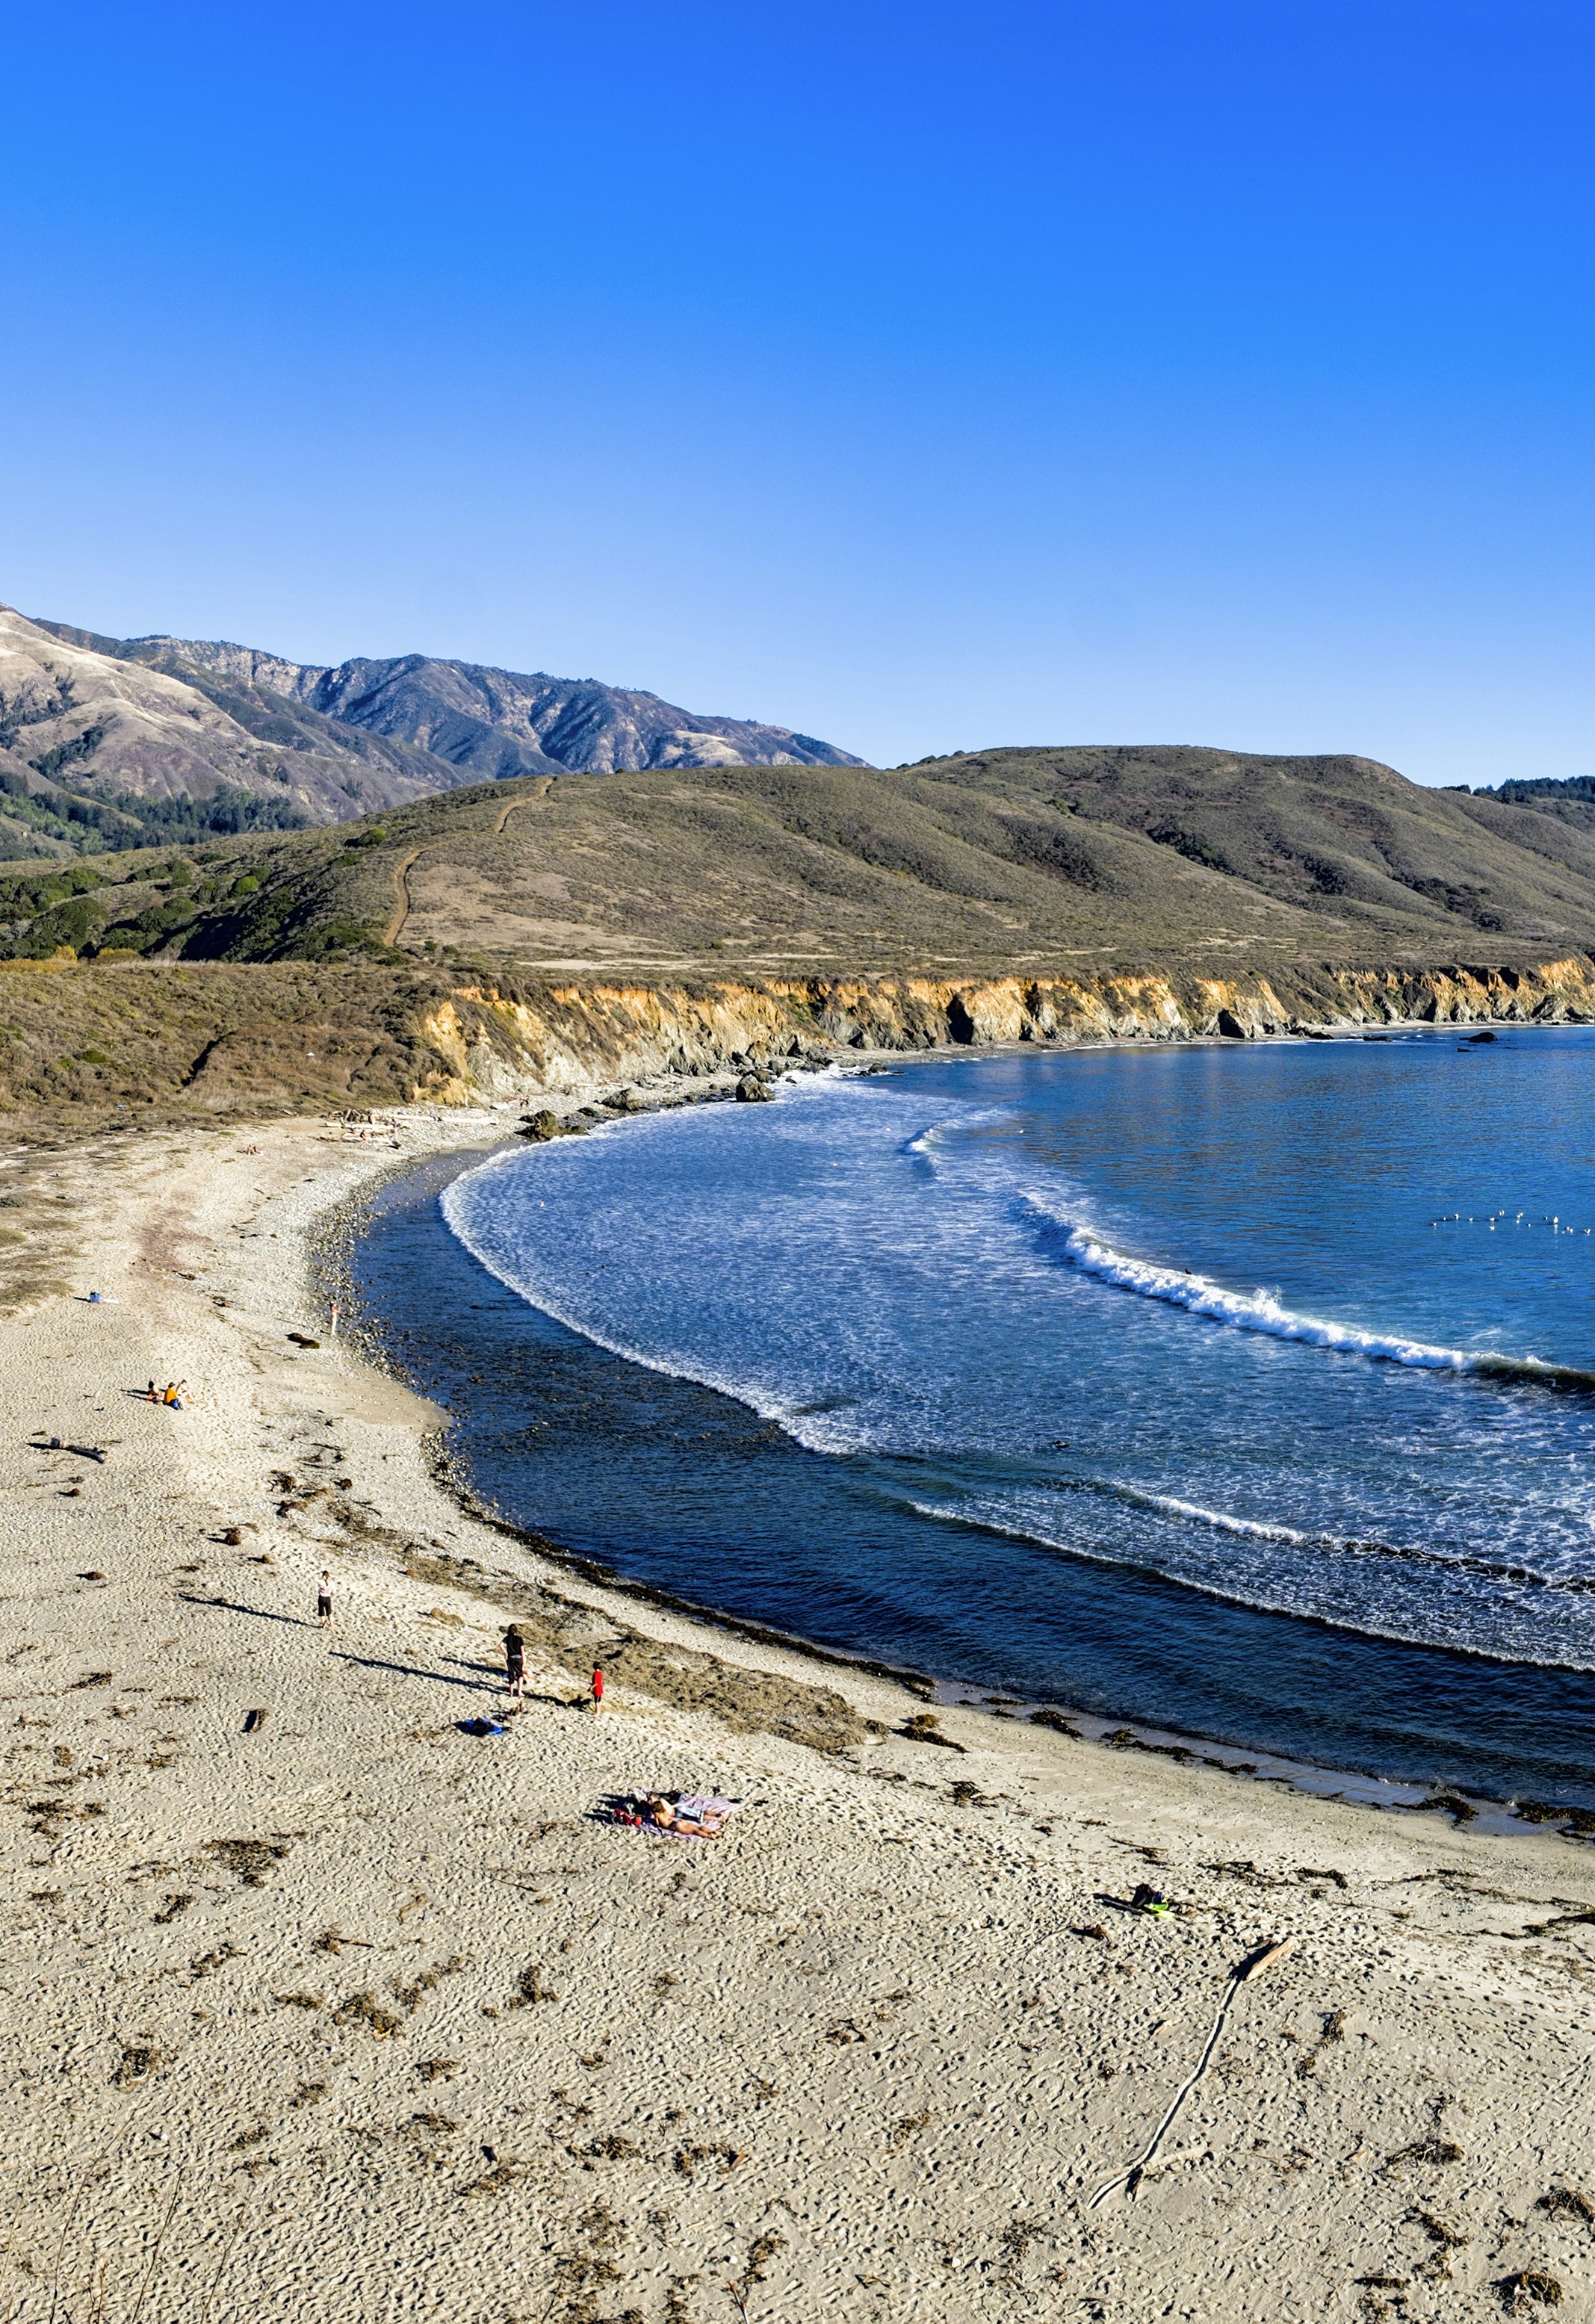 A family plays on the beach at Andrew Molera State Park